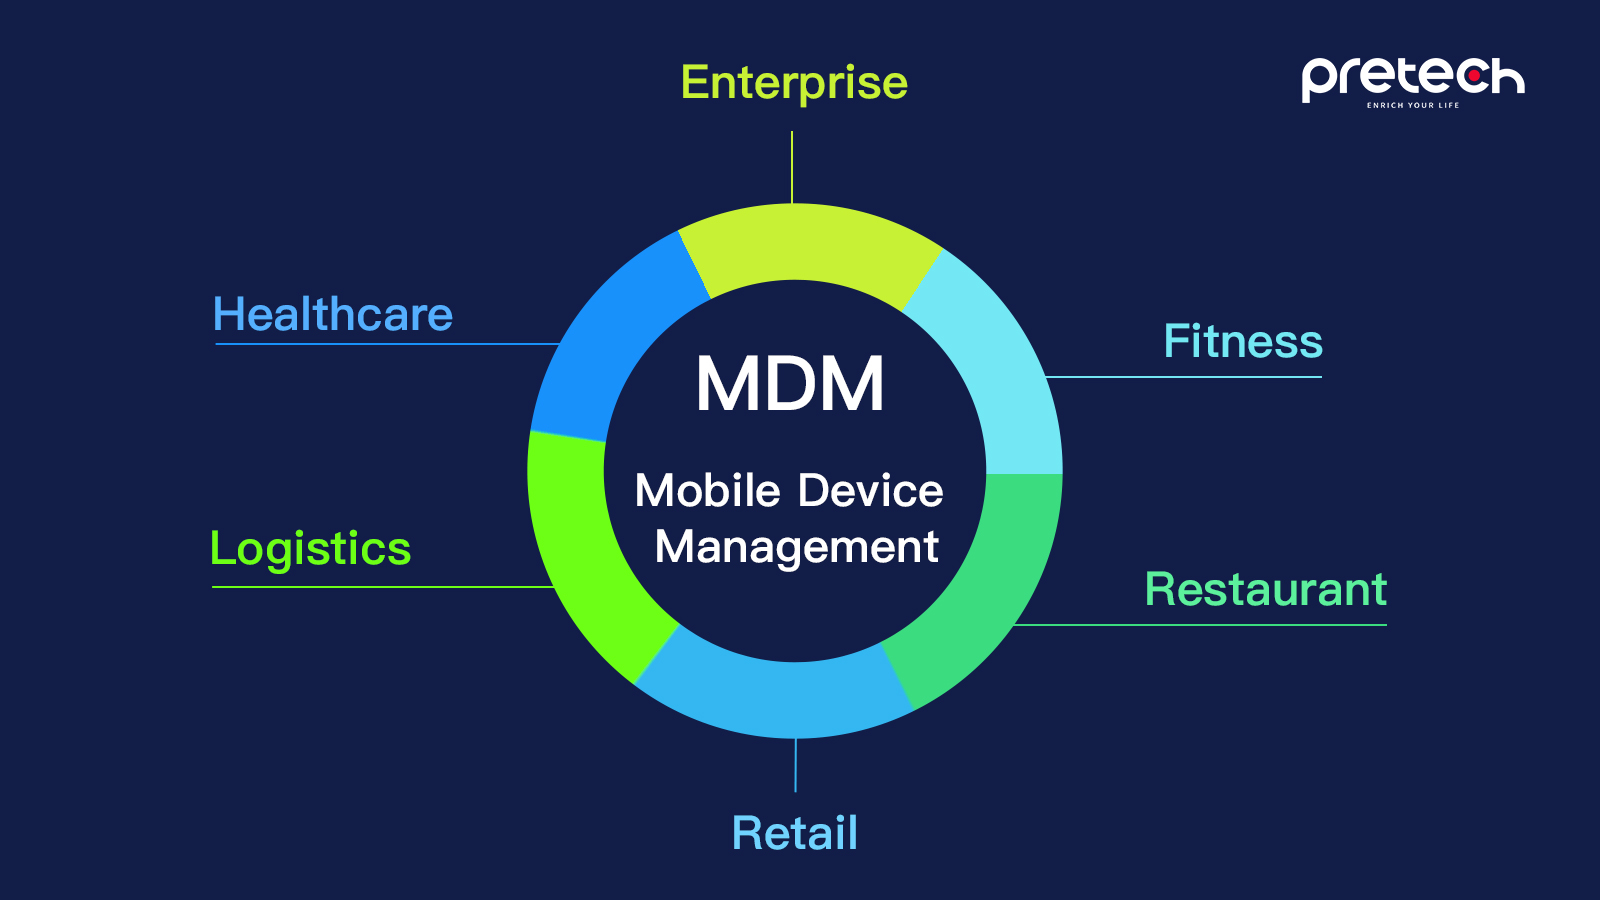 Pretech's Intelligent Hardware Solutions with MDM